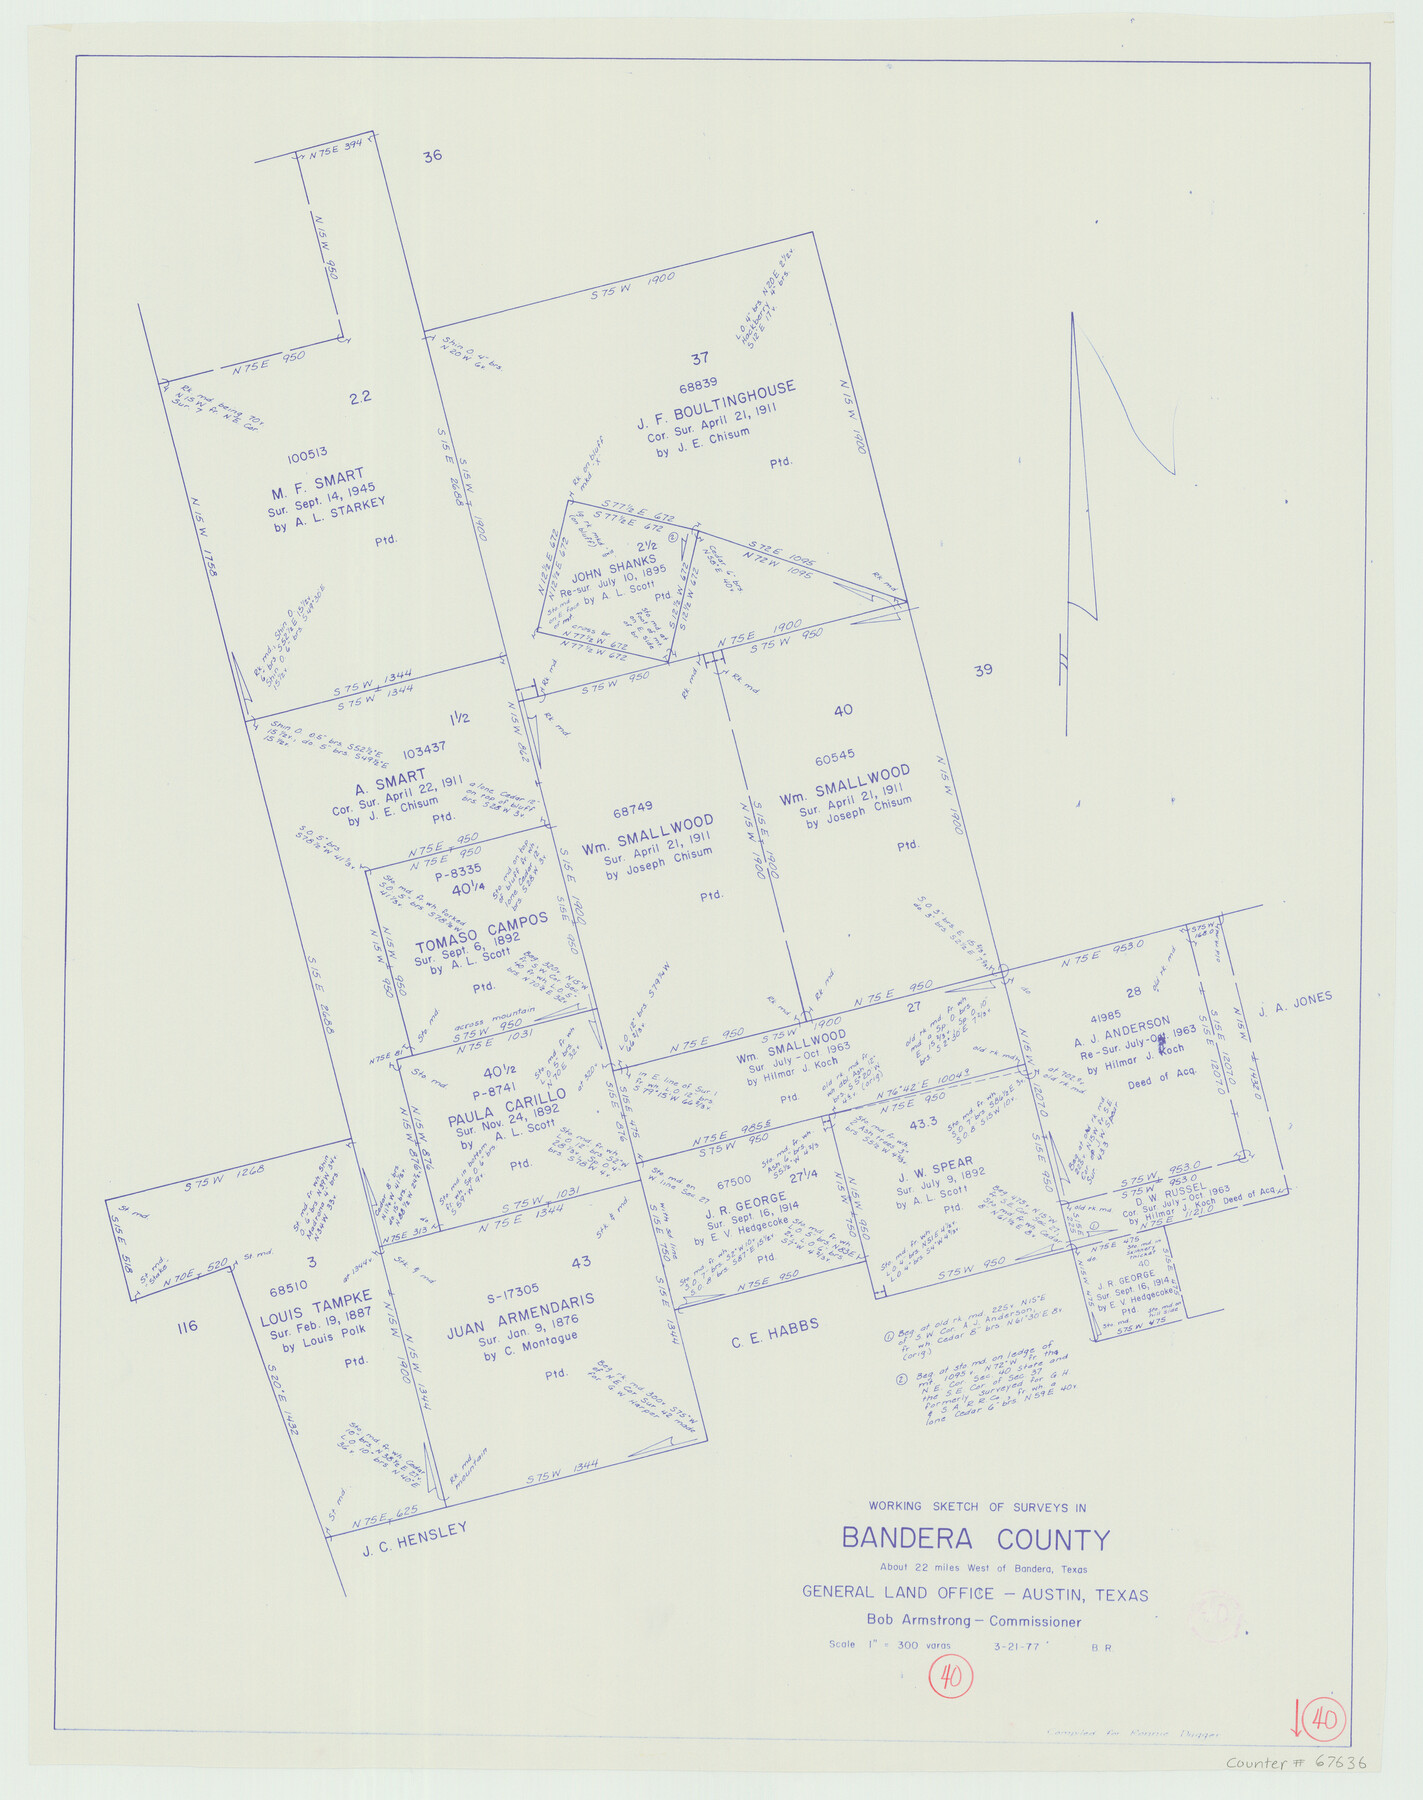 67636, Bandera County Working Sketch 40, General Map Collection